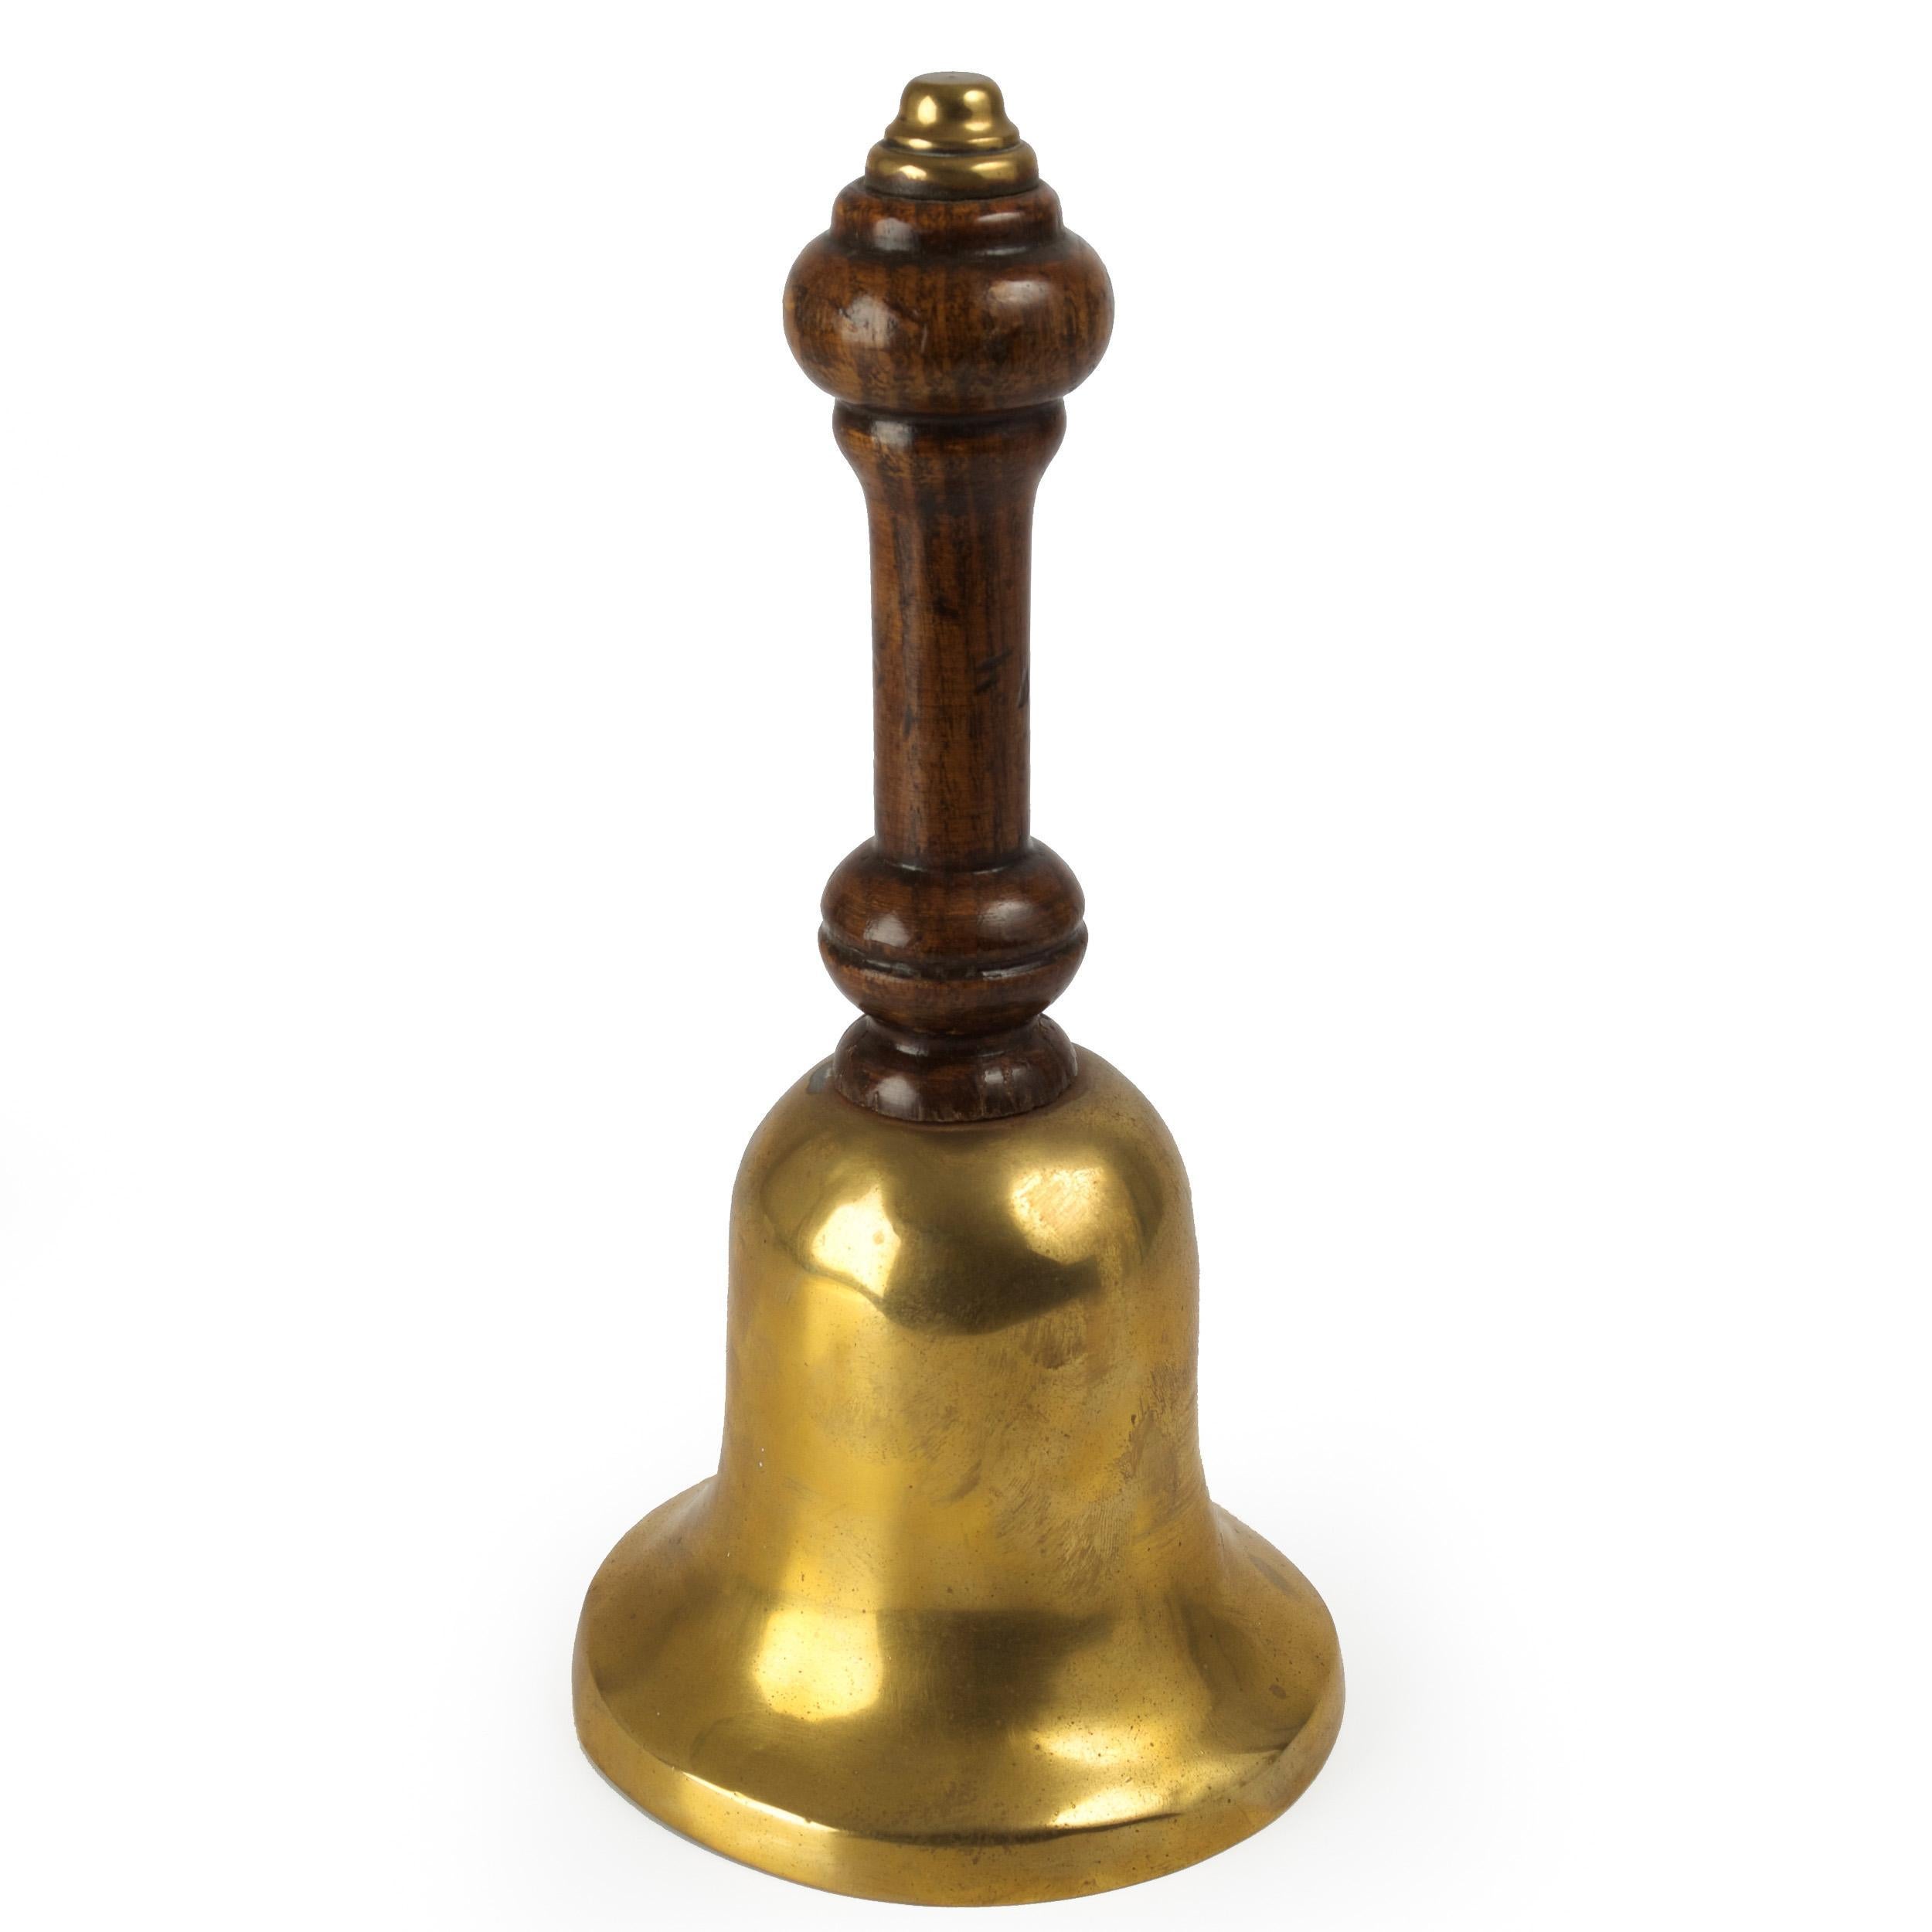 A good Victorian cast brass bell with a turned oak handle. Beautifully patinated, the handle glows through the early shellac and later waxes with turnings that are ever-so-slightly softened from regular handling.

Measurements: 9 3/8